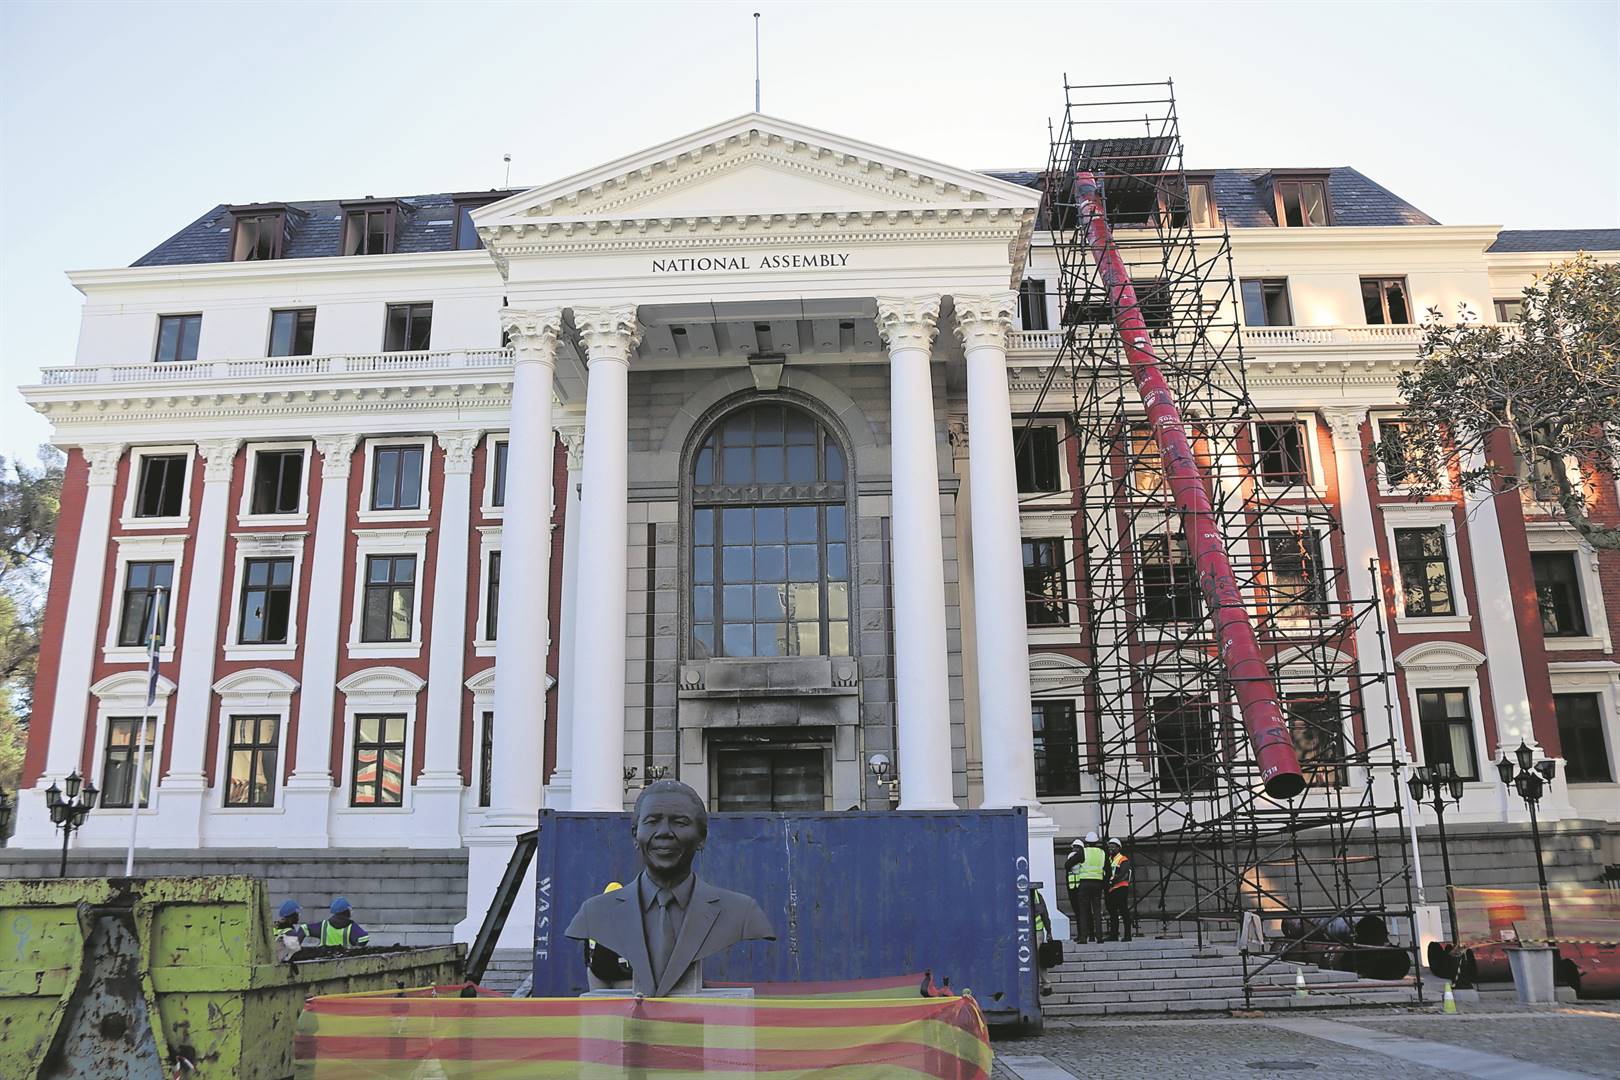 News24 | National Assembly fire: Minister Macpherson pushes for swift restoration with bi-weekly progress reports